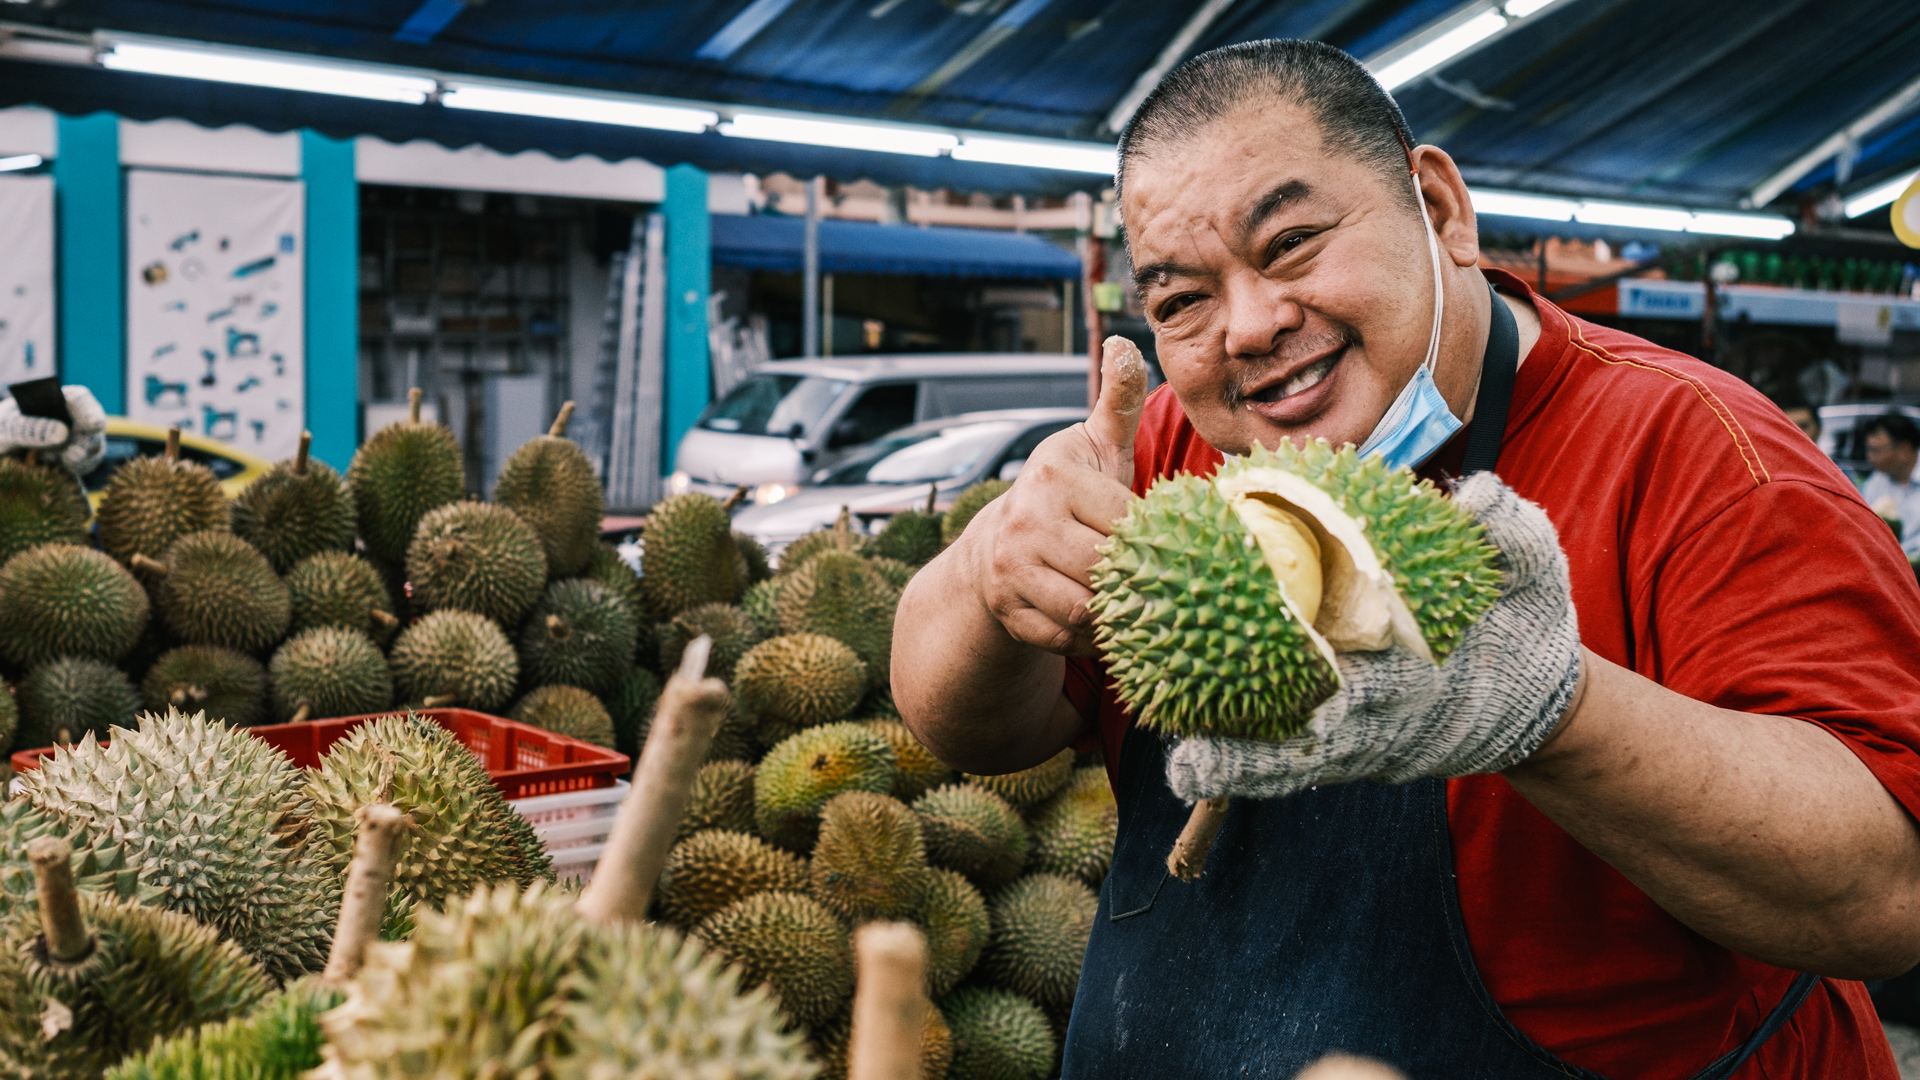 A durian seller at one of Geylang's famous fruit stalls